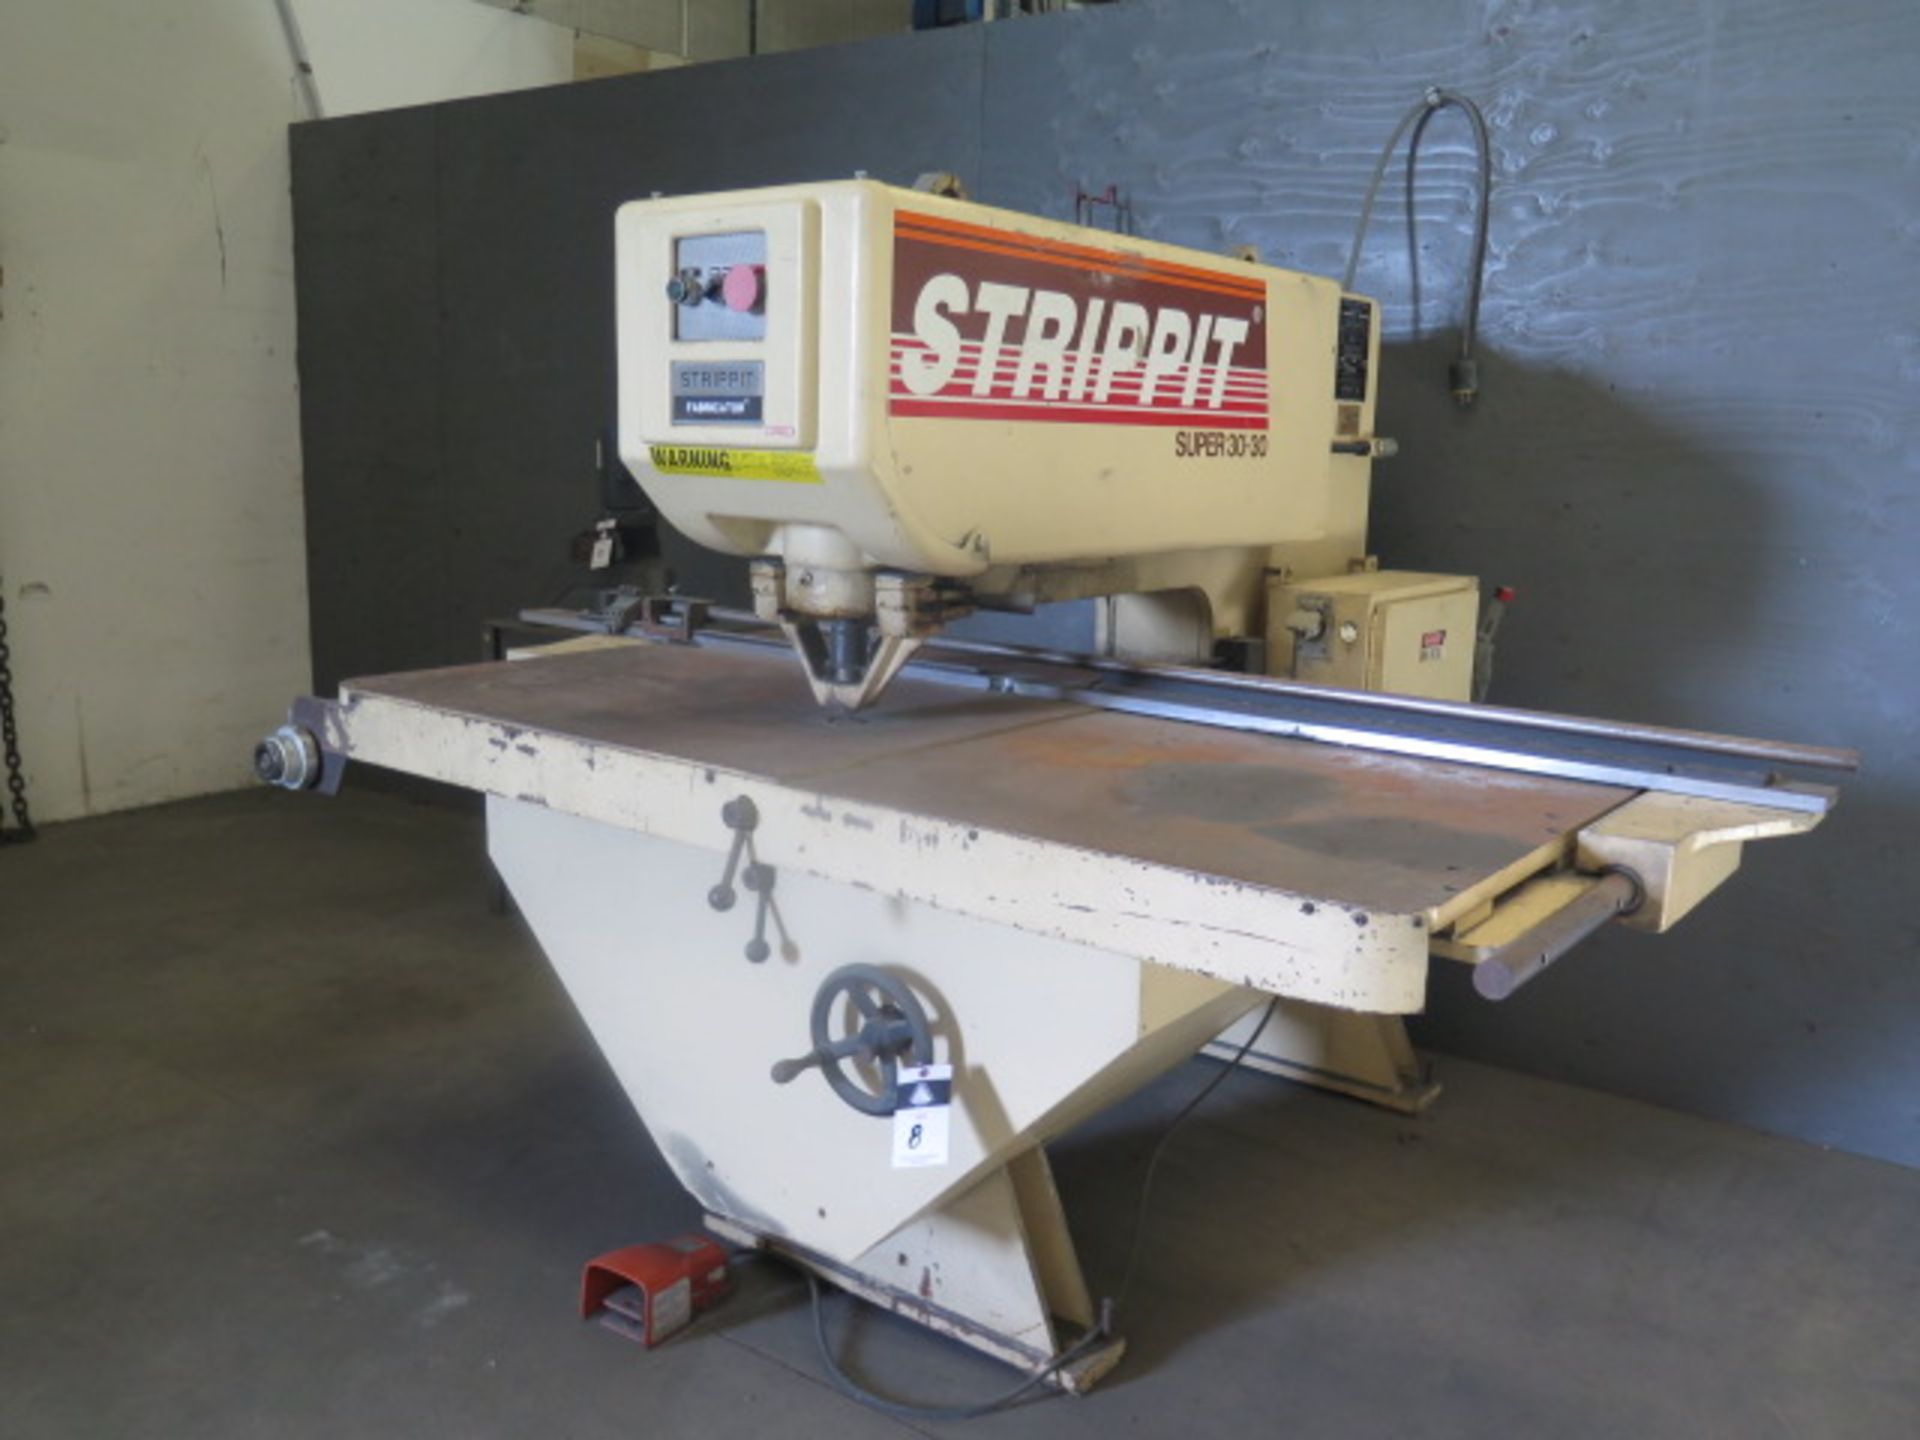 Strippit Super 30/30 30 Ton Single Station Press s/n 2345032895 w/ Single & Nibble Modes, SOLD AS IS - Image 3 of 9